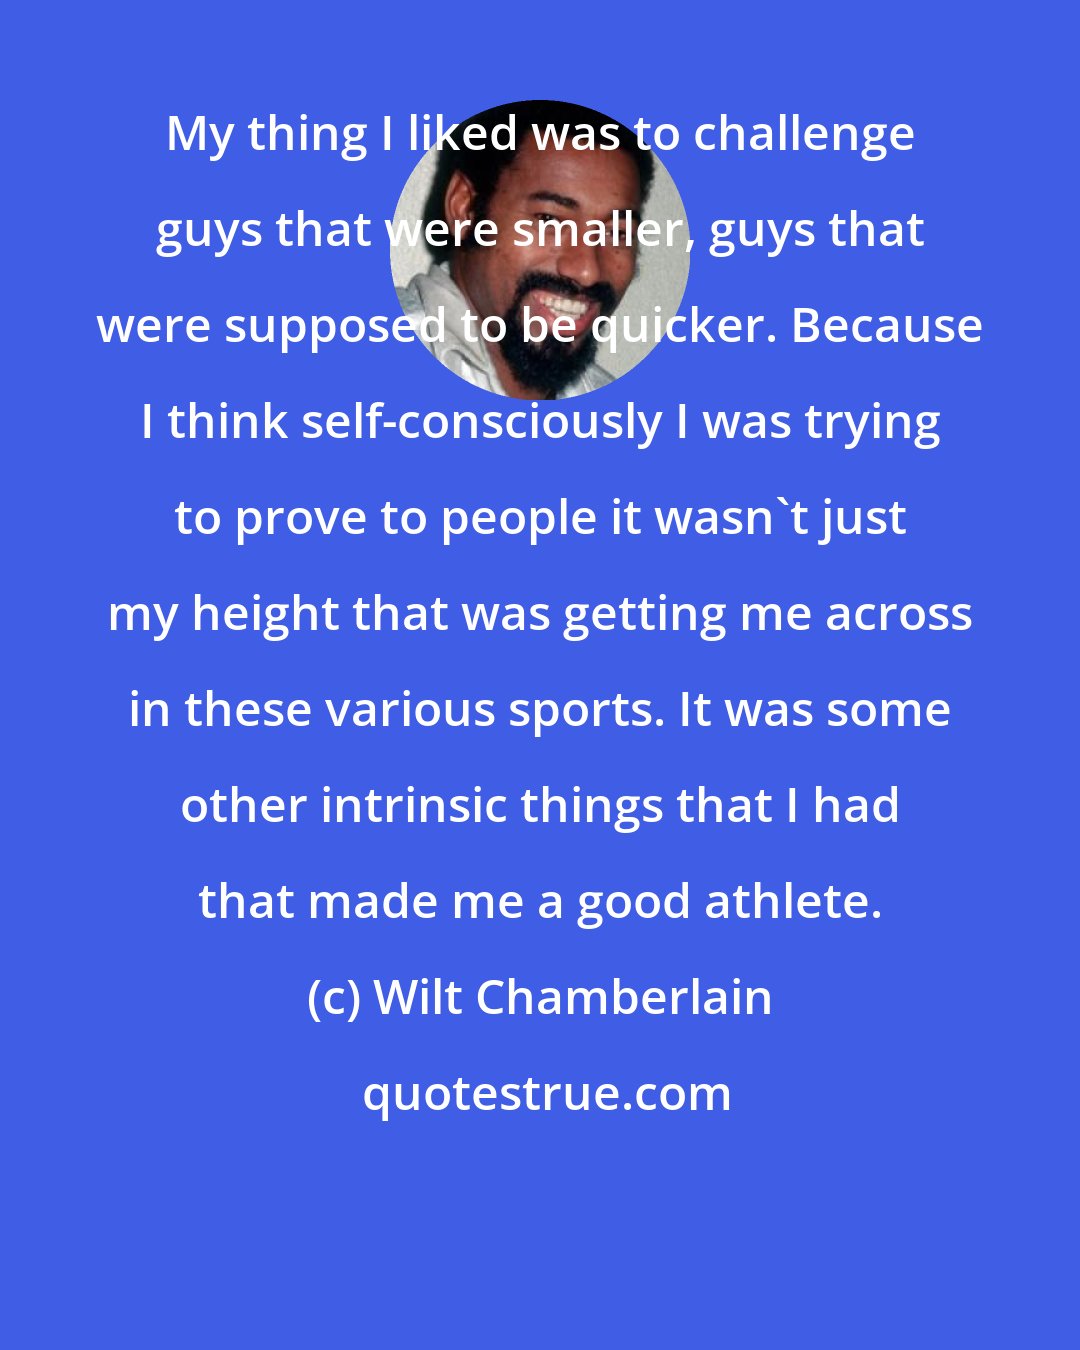 Wilt Chamberlain: My thing I liked was to challenge guys that were smaller, guys that were supposed to be quicker. Because I think self-consciously I was trying to prove to people it wasn't just my height that was getting me across in these various sports. It was some other intrinsic things that I had that made me a good athlete.